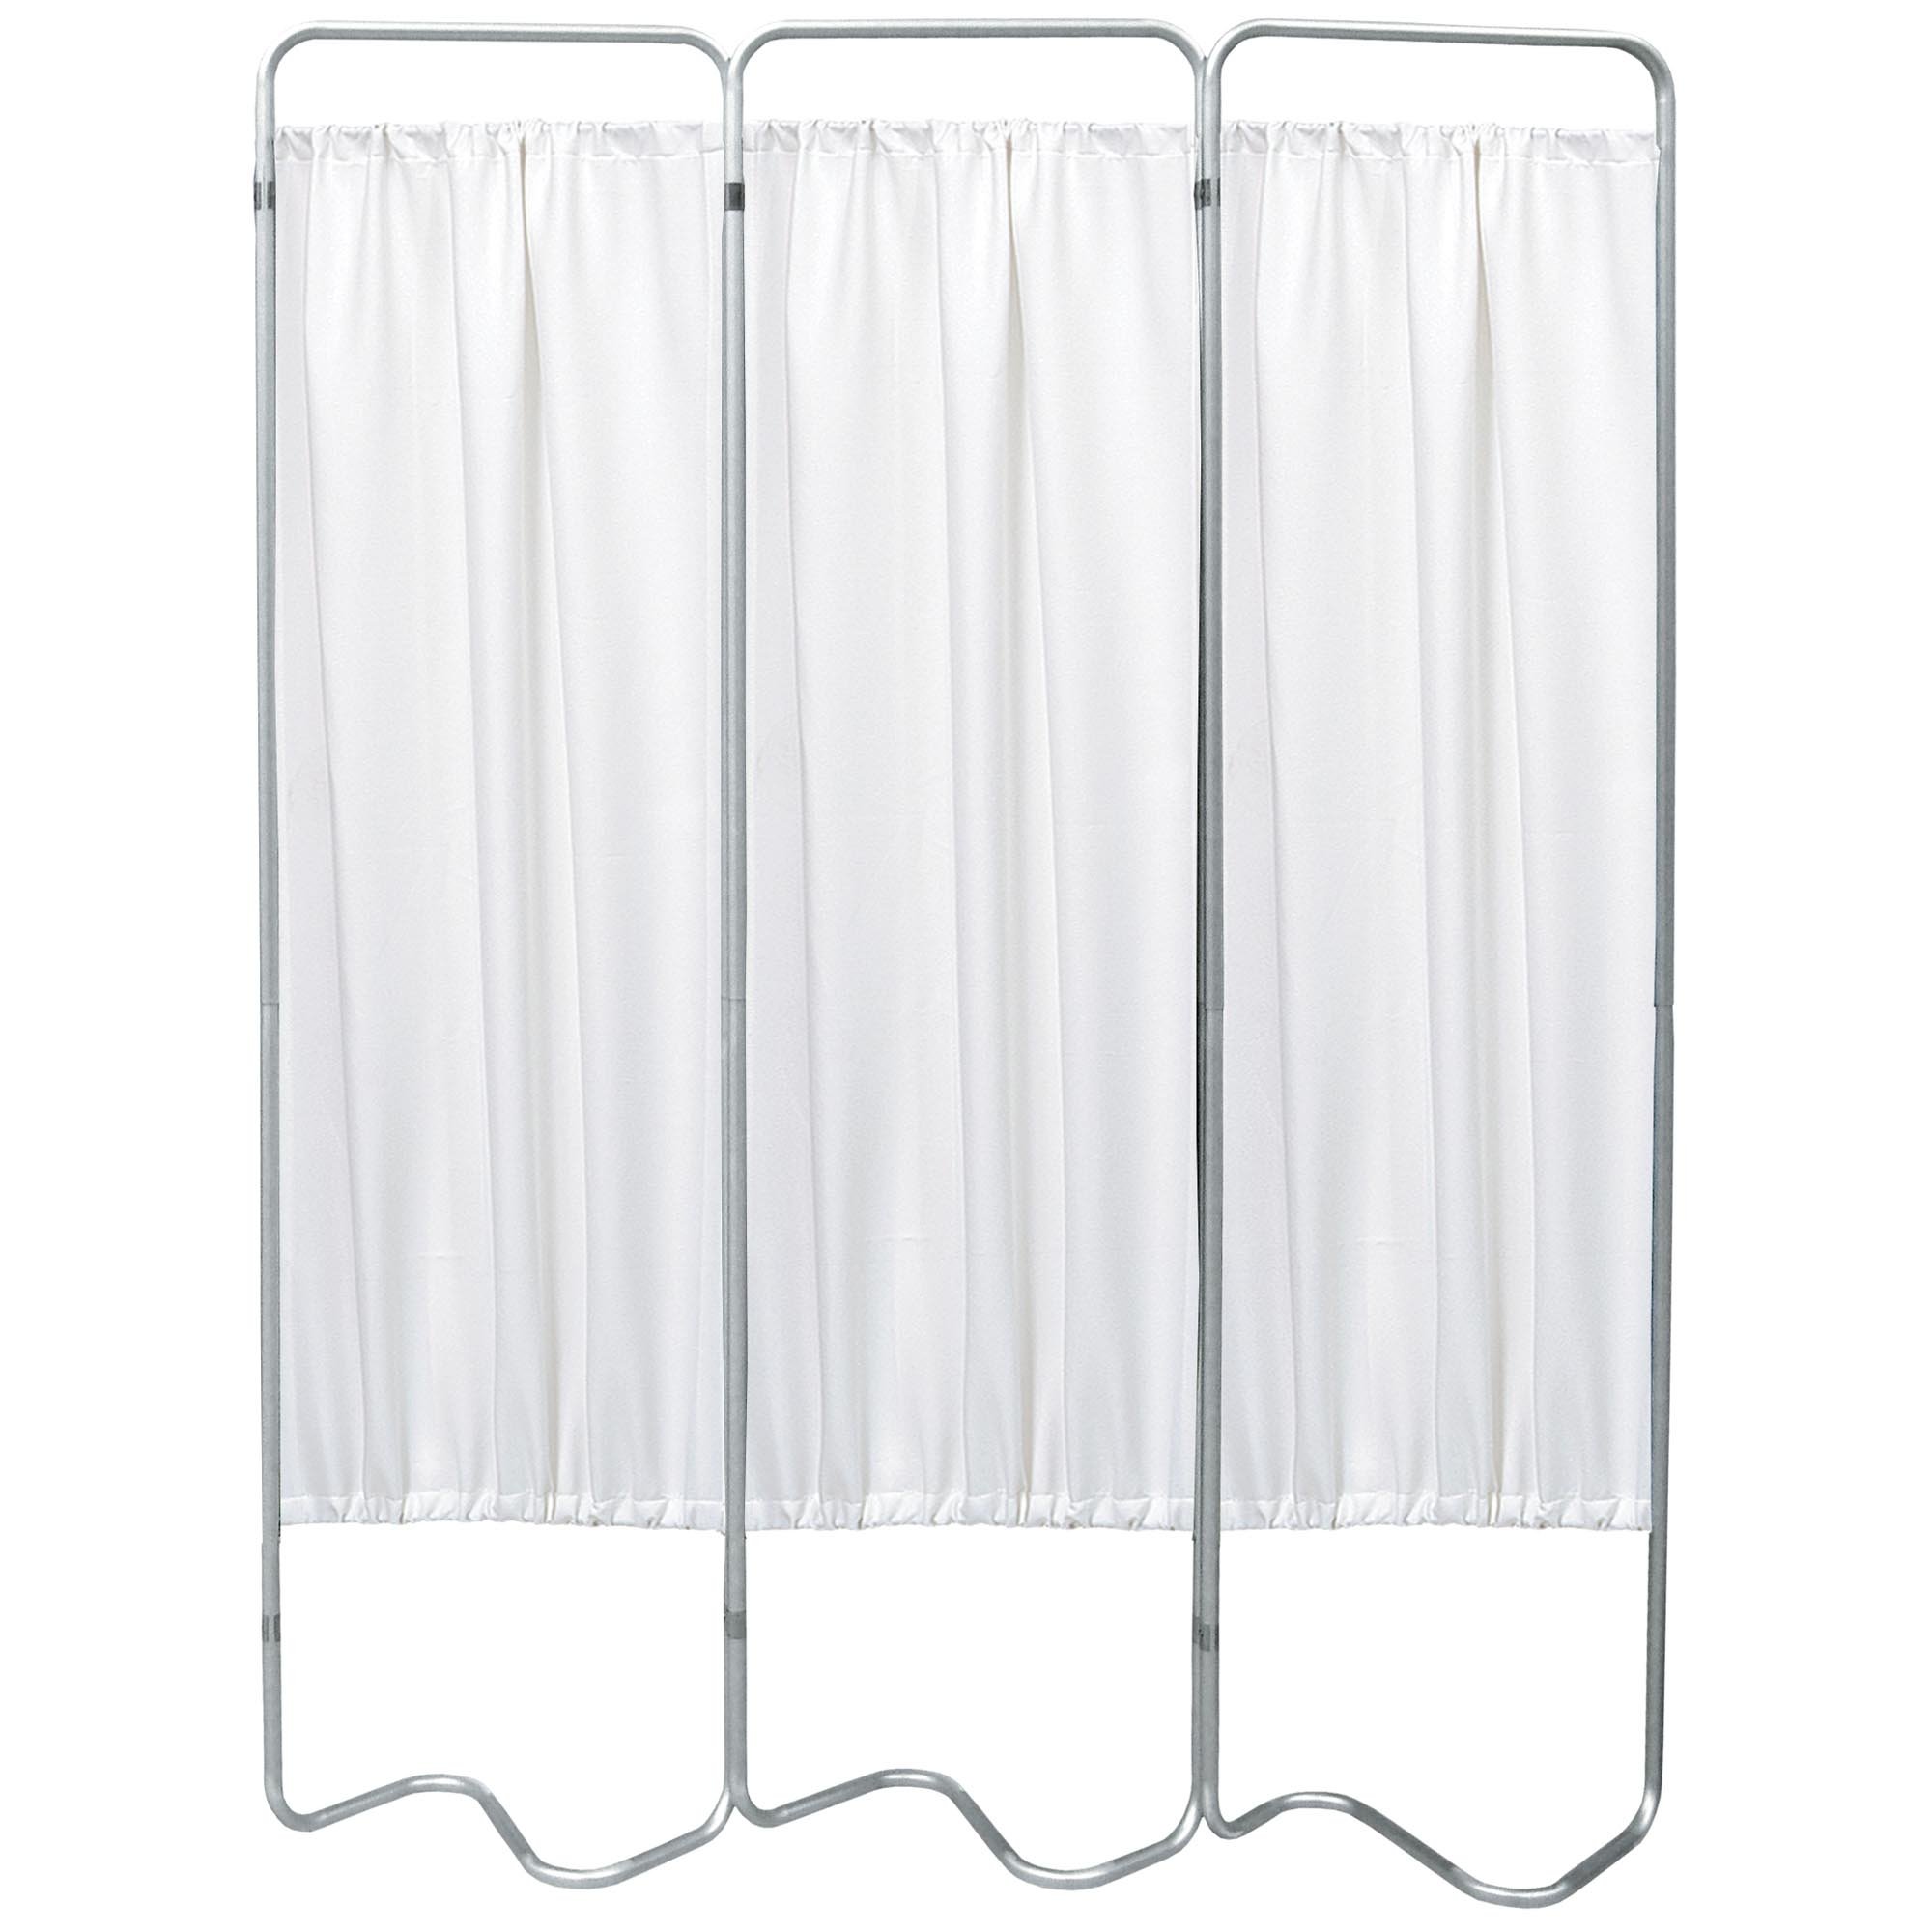 Beamatic 3 Section Folding Privacy Screen - White Vinyl Screen Panel